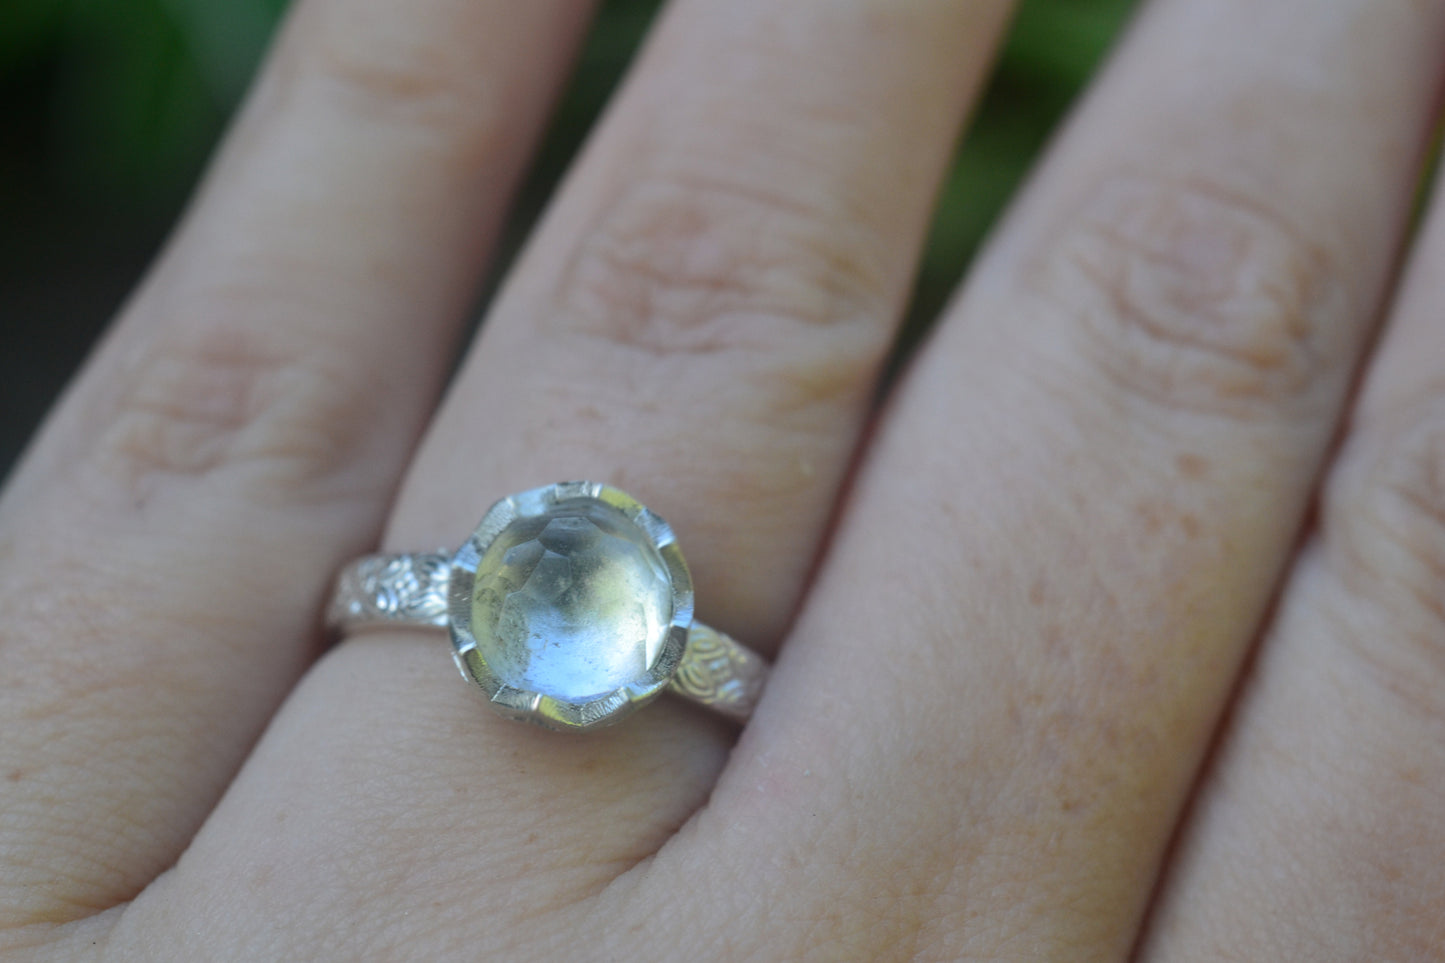 8mm White Topaz Ring in Poesy Floral Silver